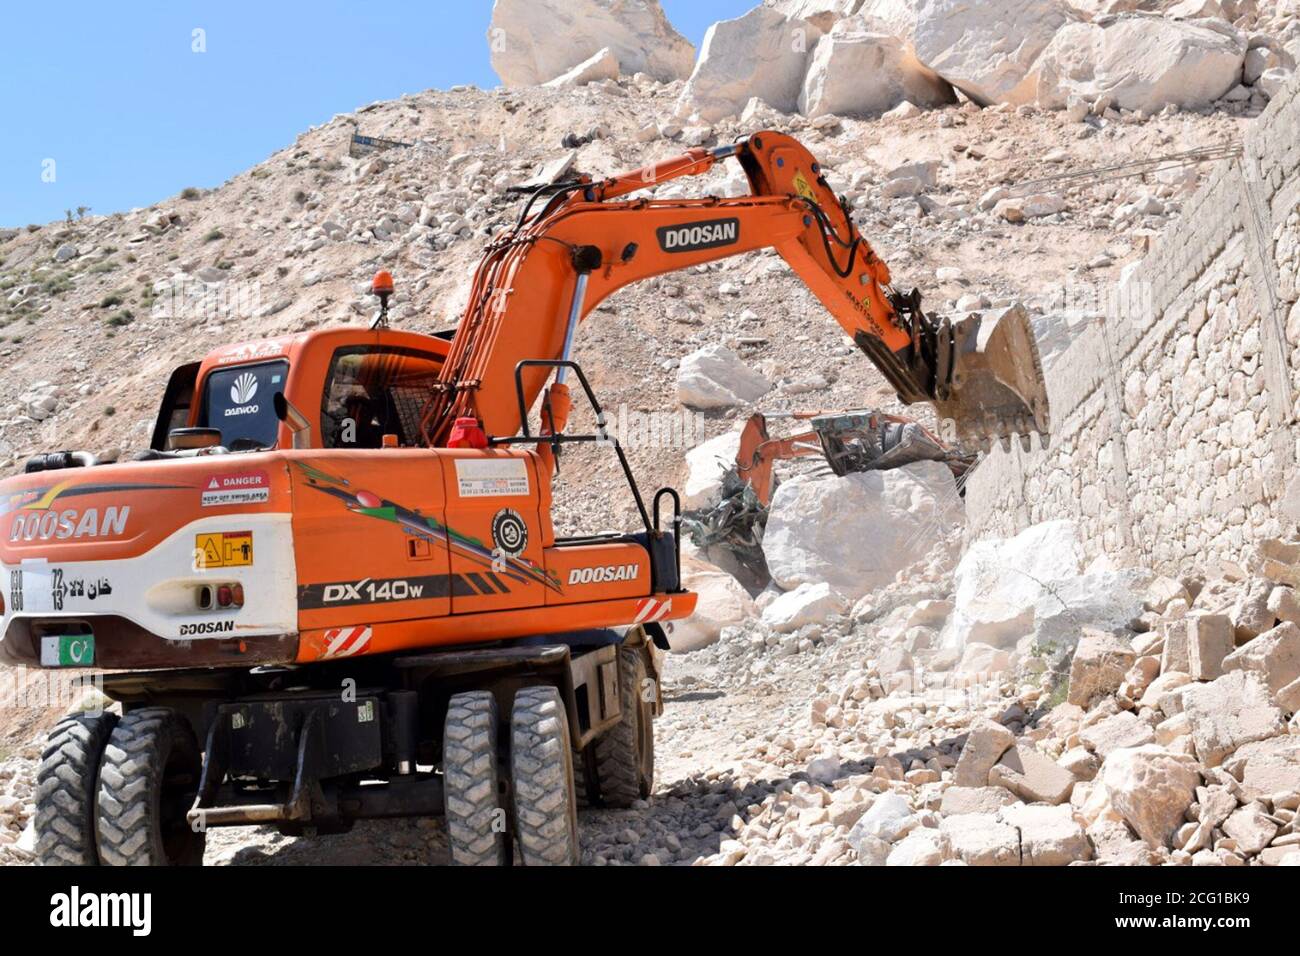 Mohmand, Pakistan. 8th Sep, 2020. Excavators are used to search for miners after a rock slide at a marble mine in Pakistan's northwest tribal district of Mohmand, on Sept. 8, 2020. The death toll from the rock slide incident at a marble mine, which took place on Monday in Pakistan's northwest tribal district of Mohmand, climbed to 19, police and local media said on Tuesday. Credit: Str/Xinhua/Alamy Live News Stock Photo